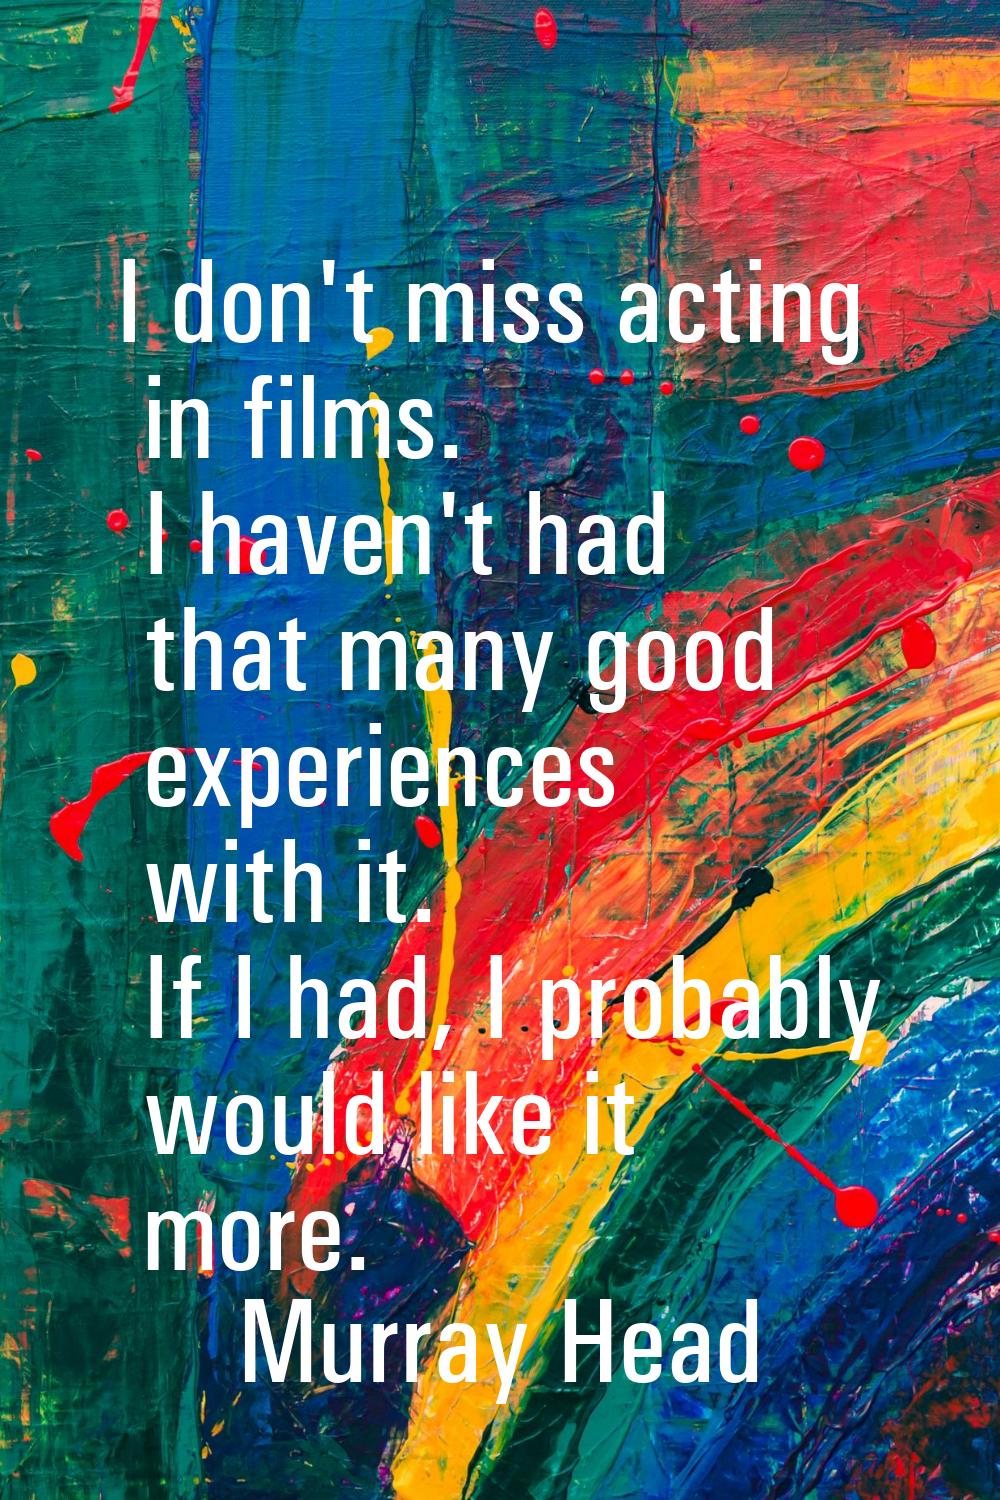 I don't miss acting in films. I haven't had that many good experiences with it. If I had, I probabl